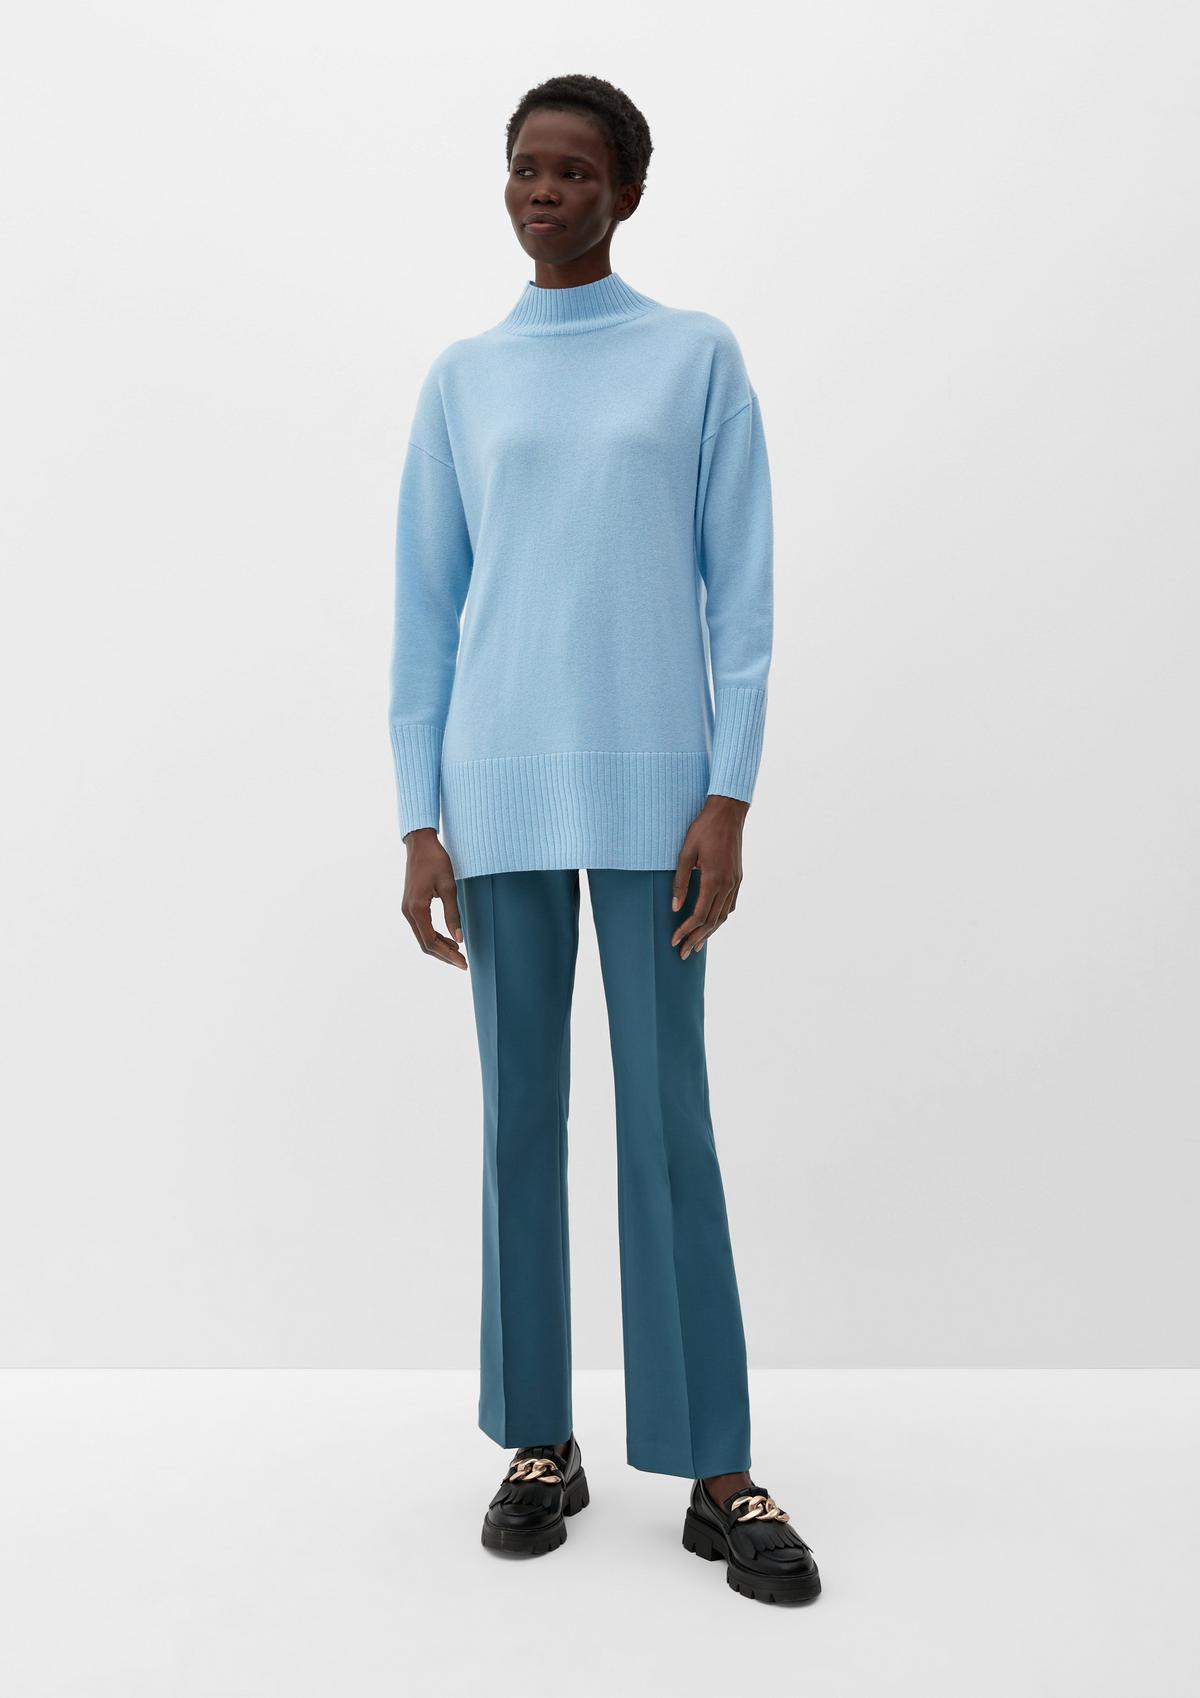 s.Oliver Cashmere jumper with ribbed trims